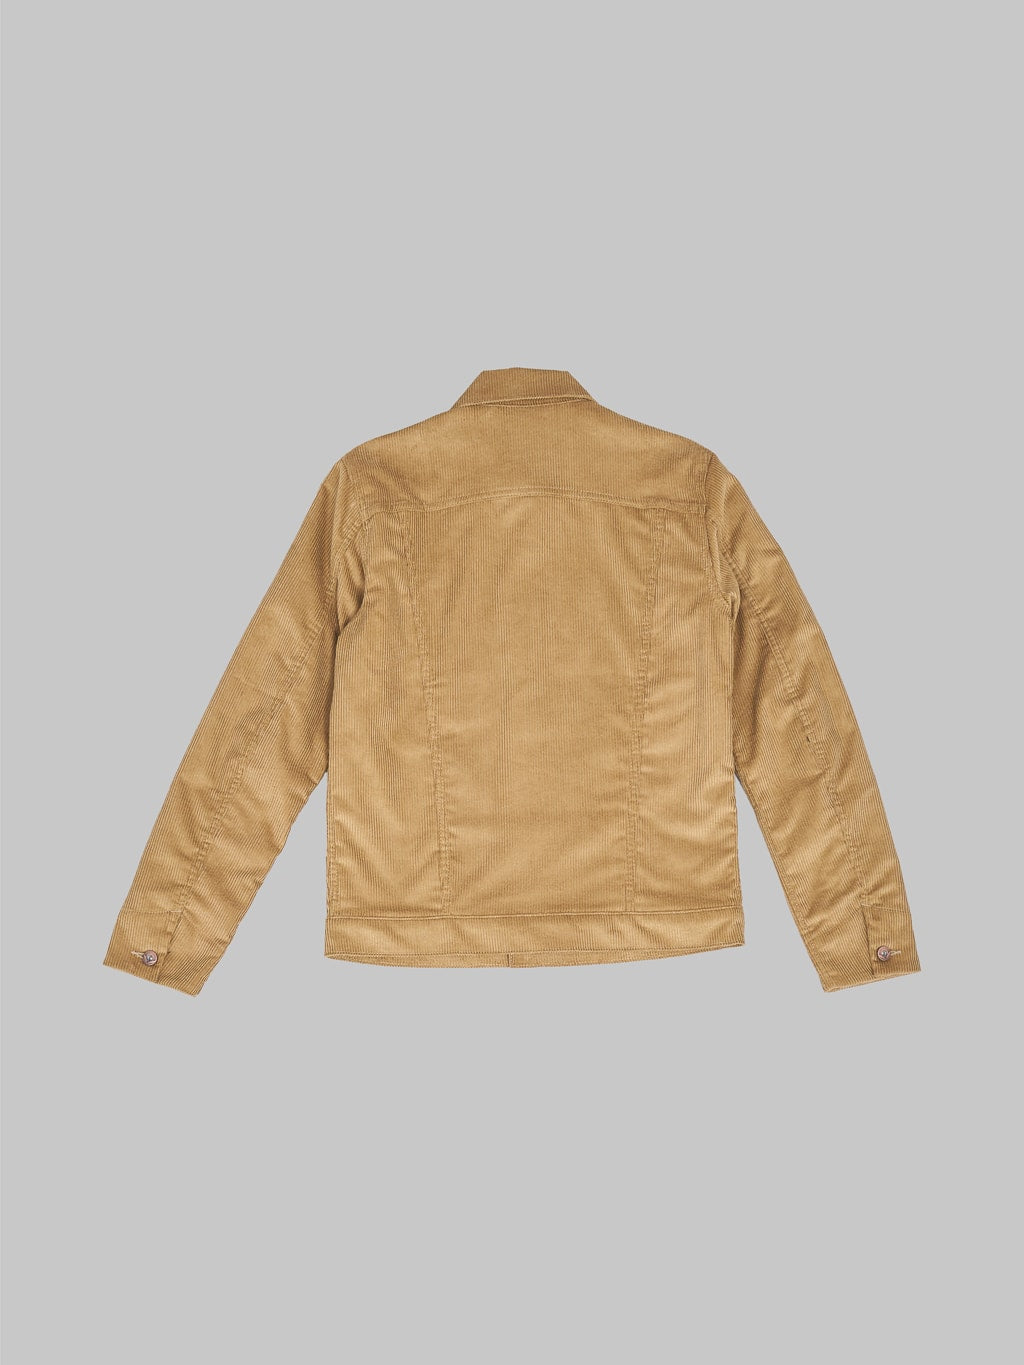 Rogue Territory Supply Jacket Lined Tan Corduroy back